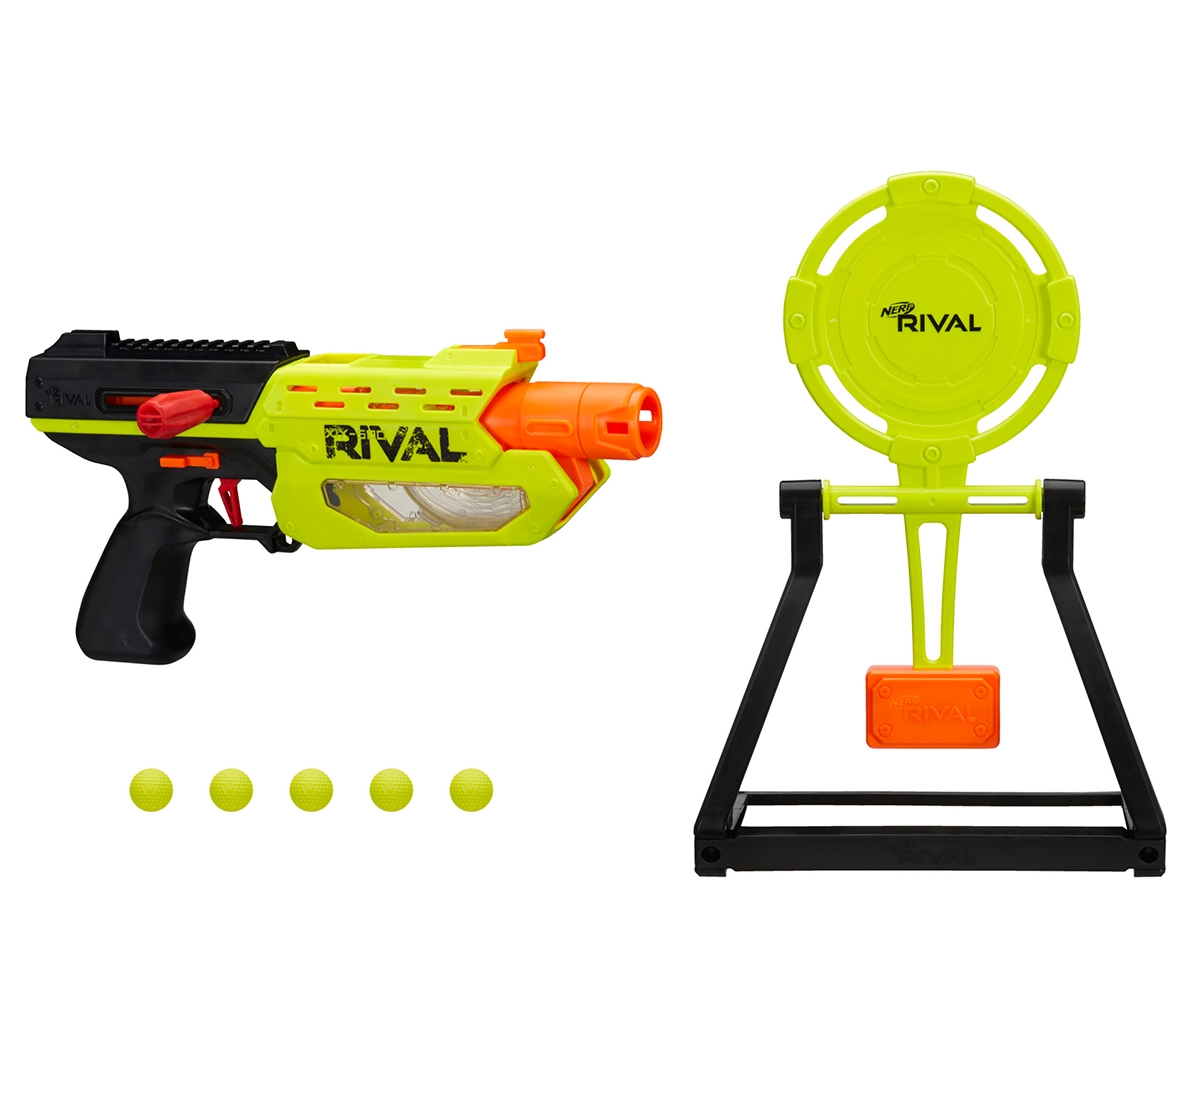 NERF Rival Blaster Mercury XIX-500 Edge Series with Target and 5 Rounds, Multicolor, 14Y+